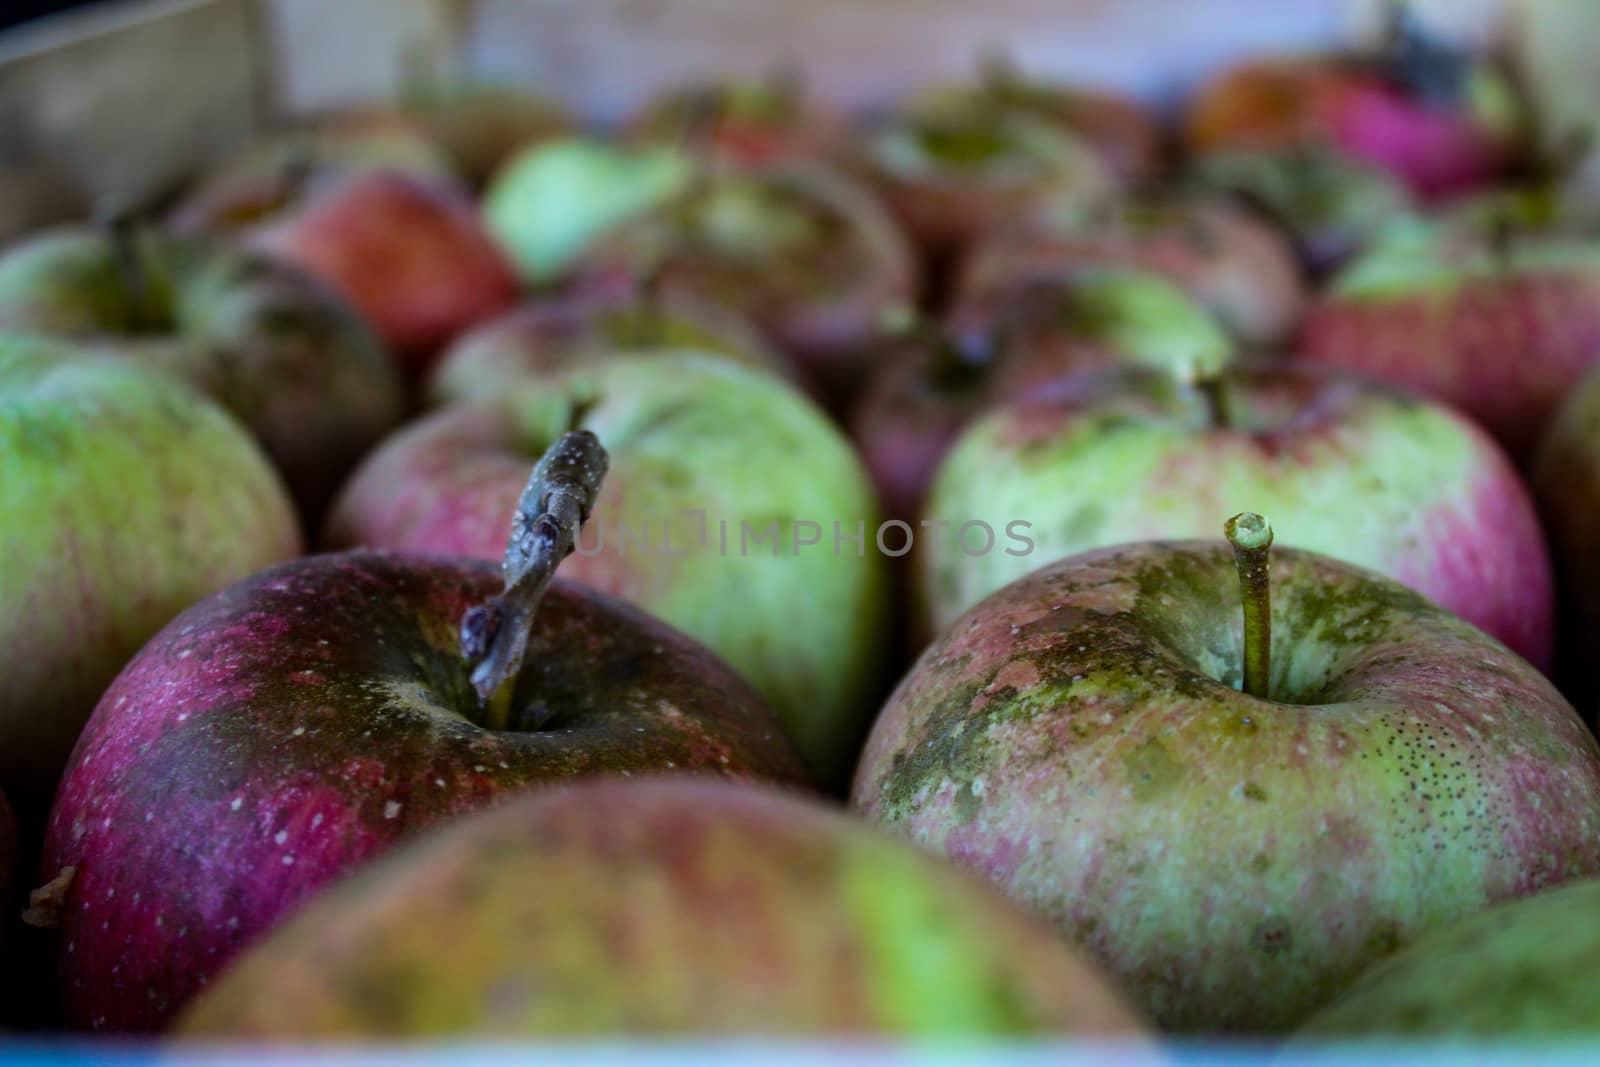 Cultivated homemade apples that are perfectly arranged in a wooden crate. by mahirrov